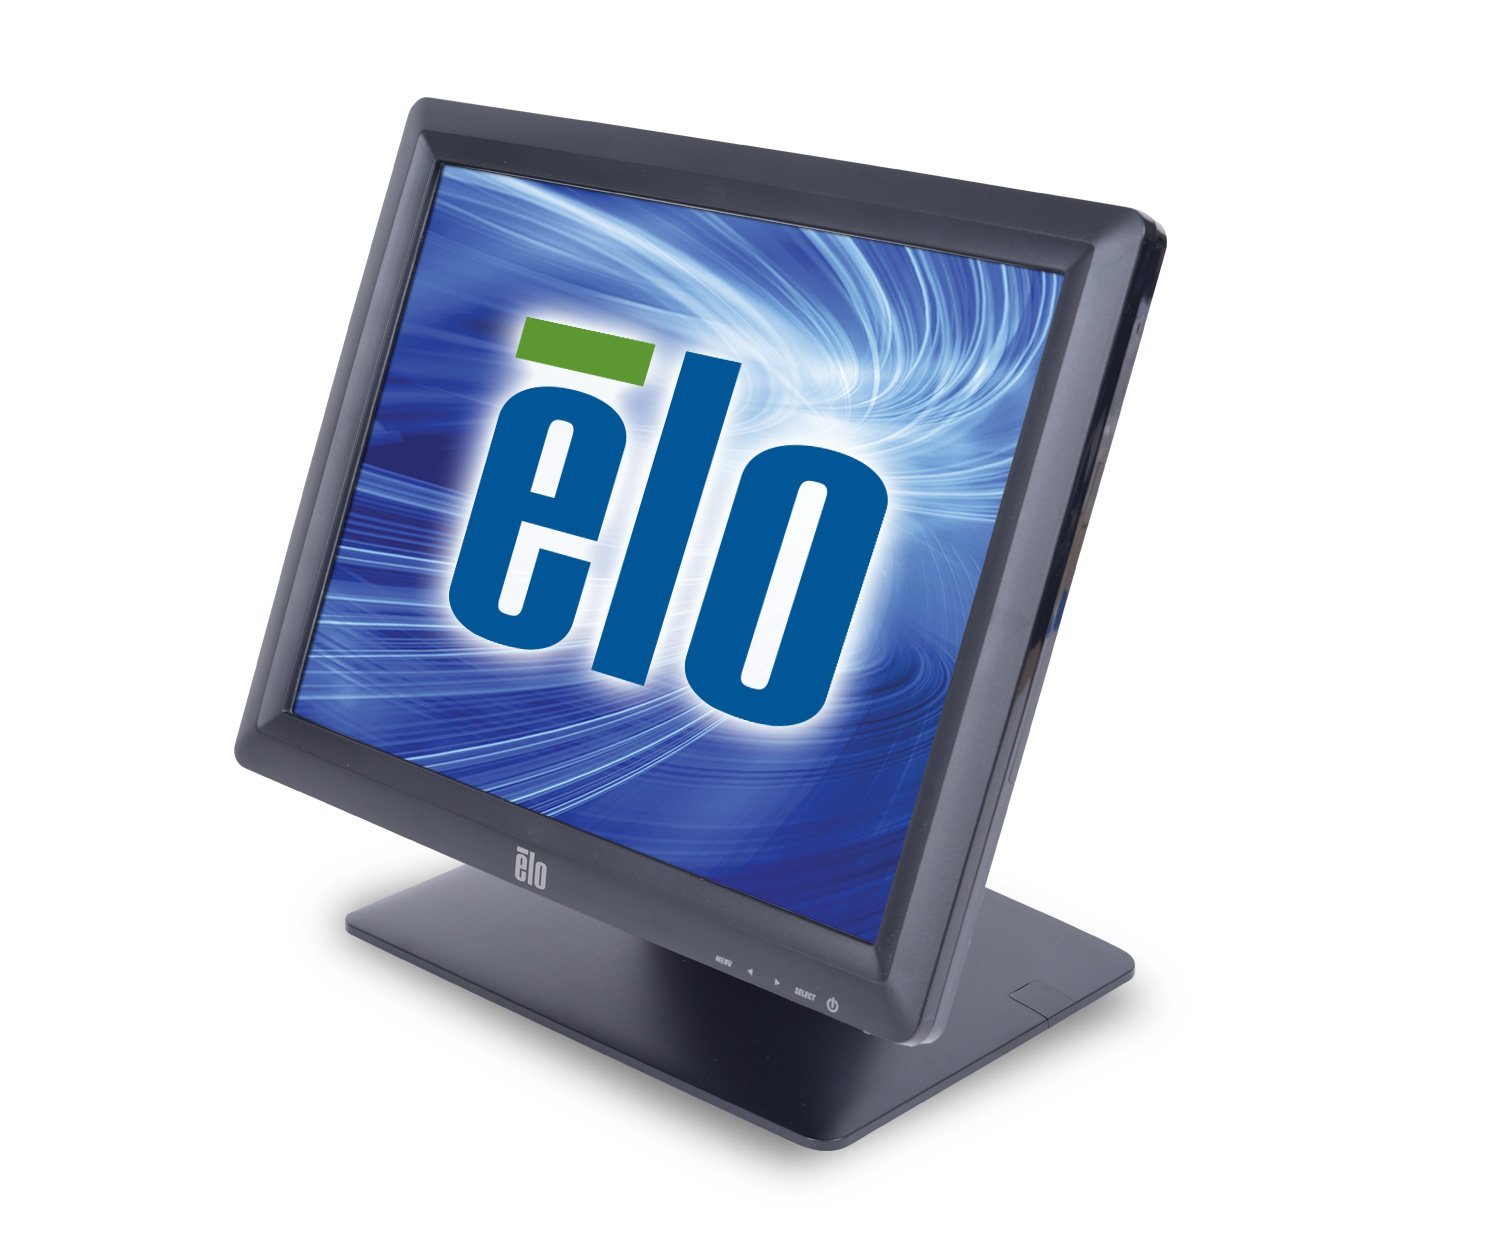 Visual Elo Touch 1517L